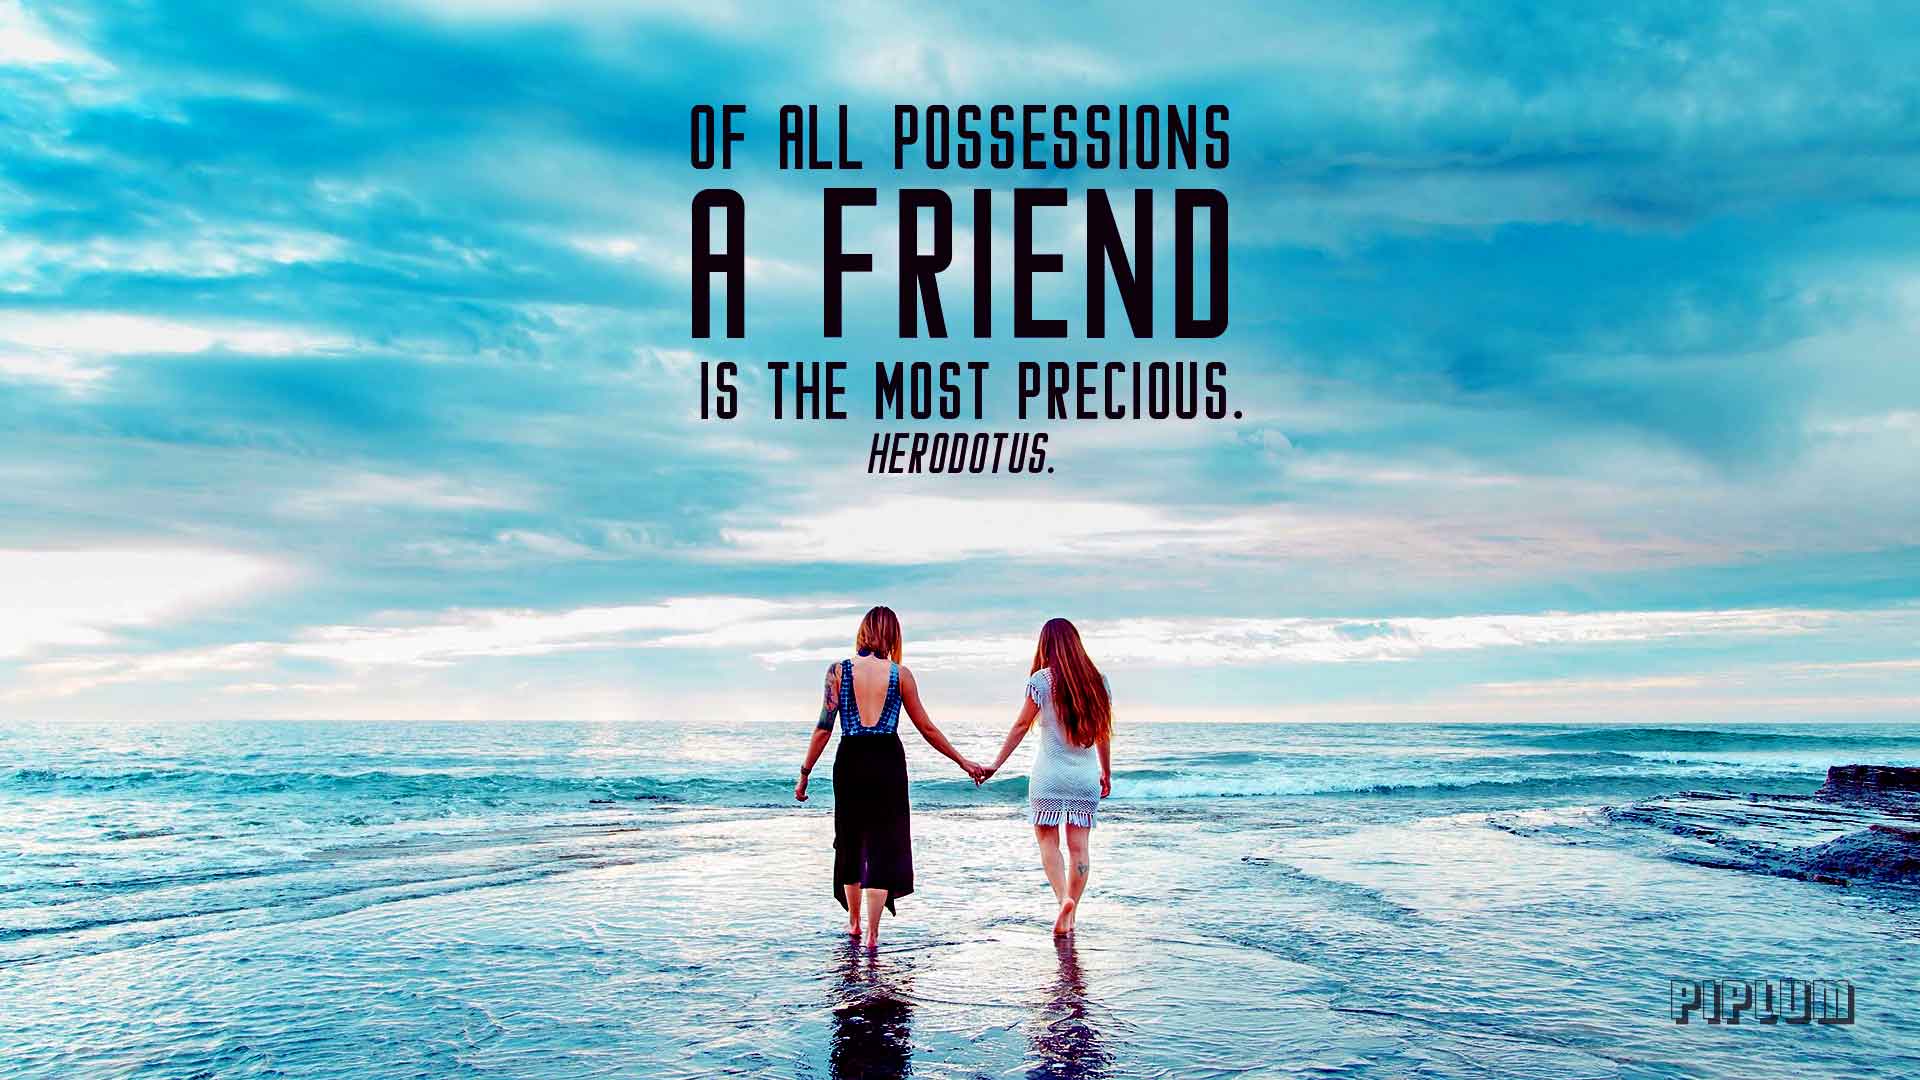 Friendship-quote-As-Herodotus-said-a-long-time-ago-Of-all-possessions,-a friend-is-the-most-precious.